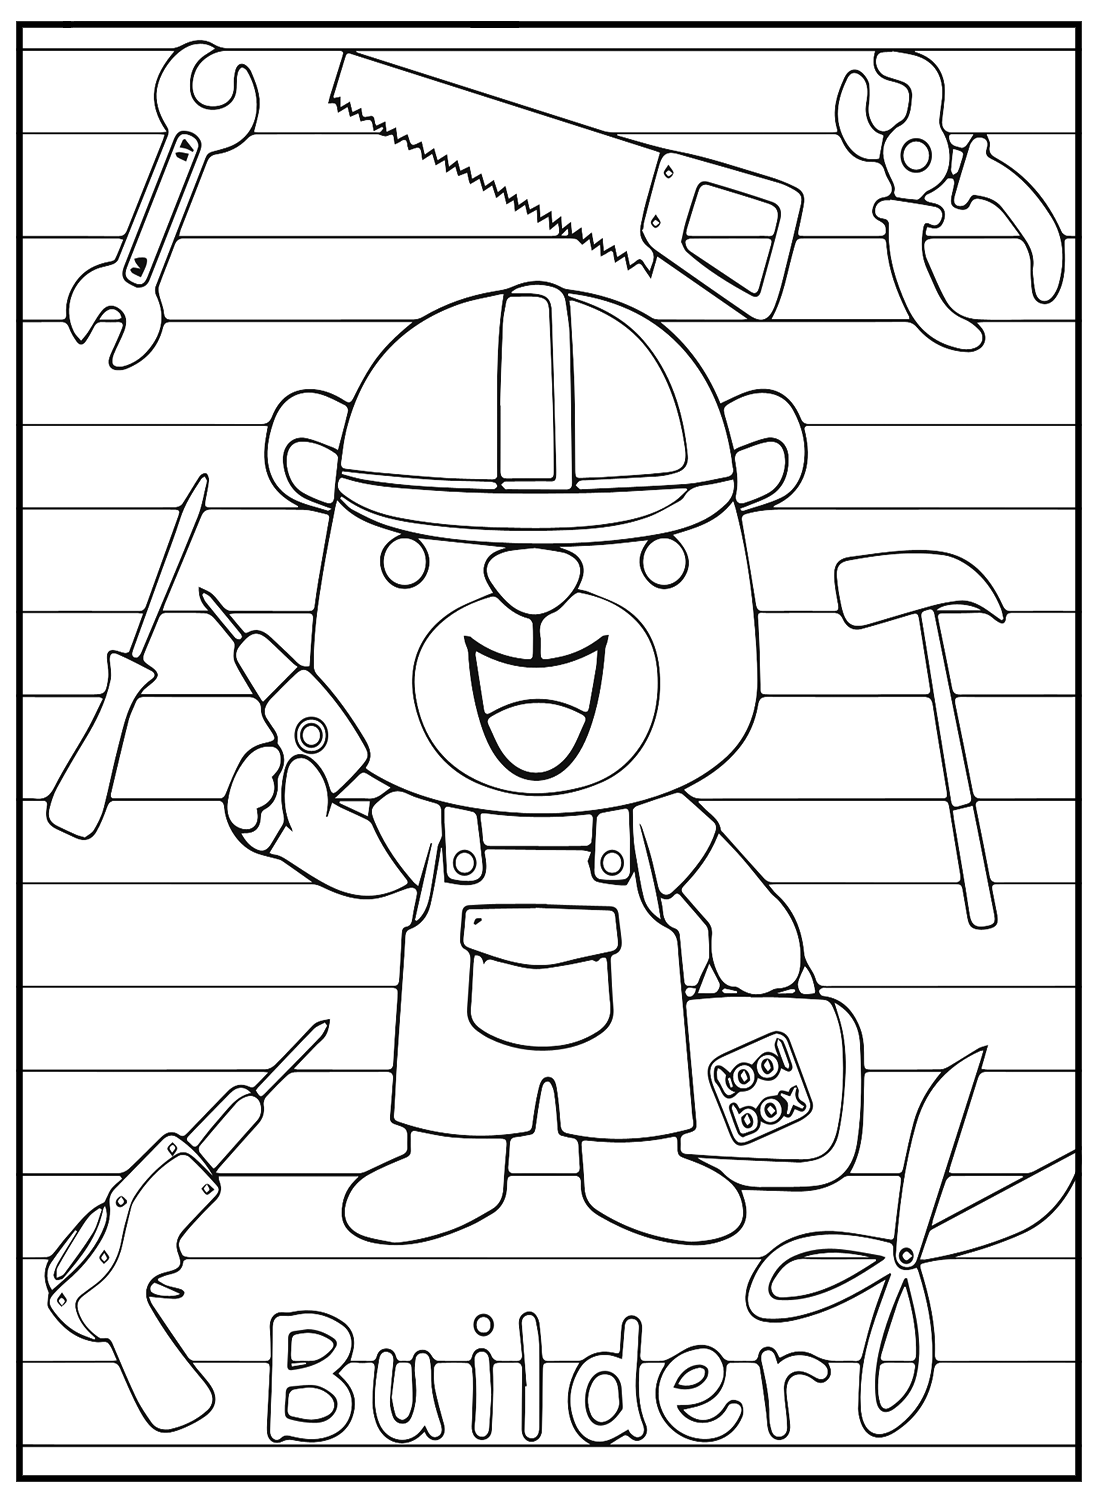 Bear And Toolbox Coloring Pages